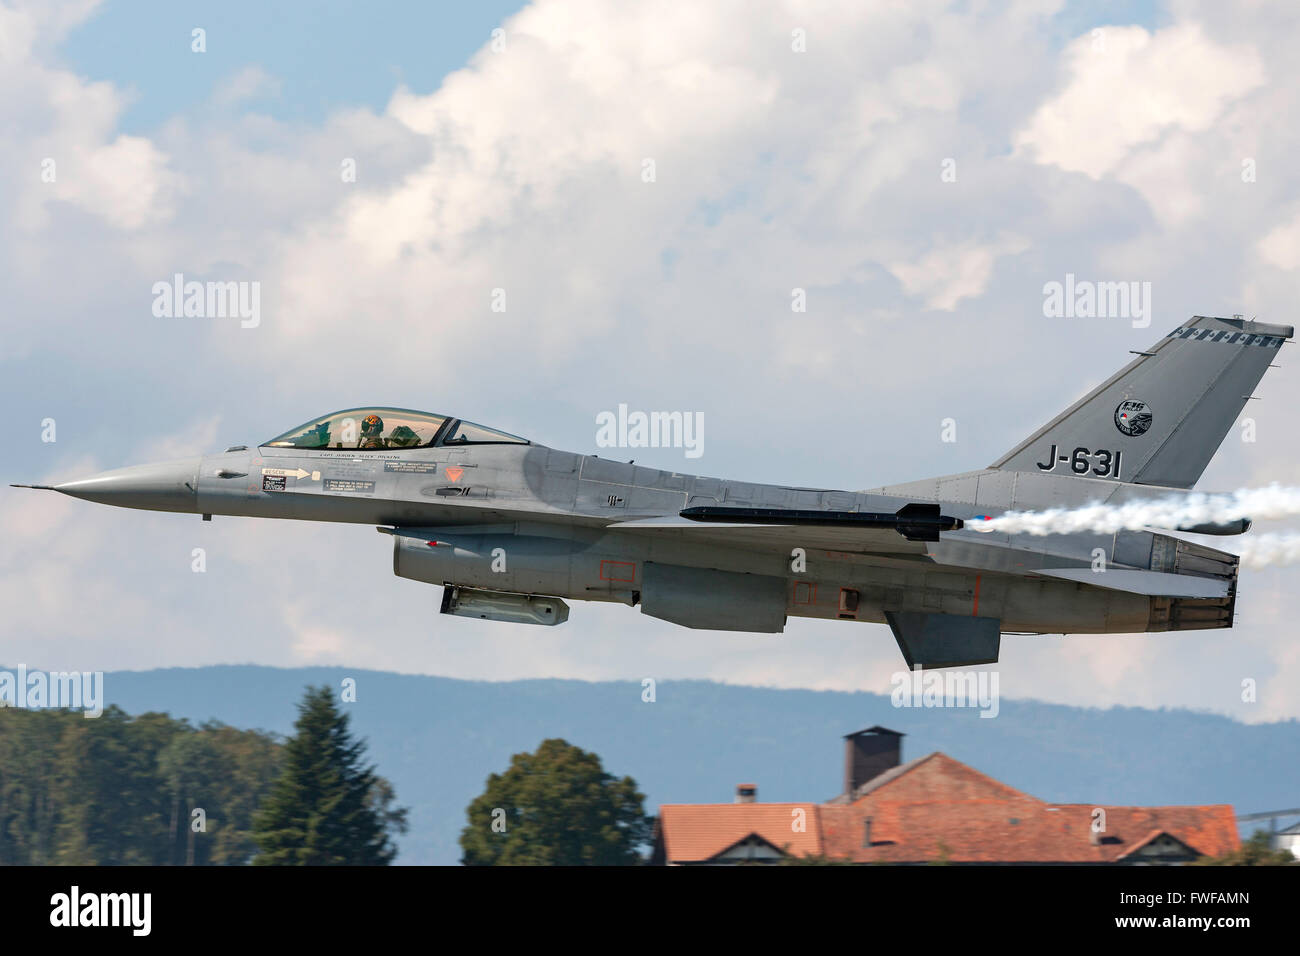 Royal Netherlands Air Force General Dynamics F-16 Fighting Falcon (Viper) fighter aircraft from the F-16 Demo Team. Stock Photo